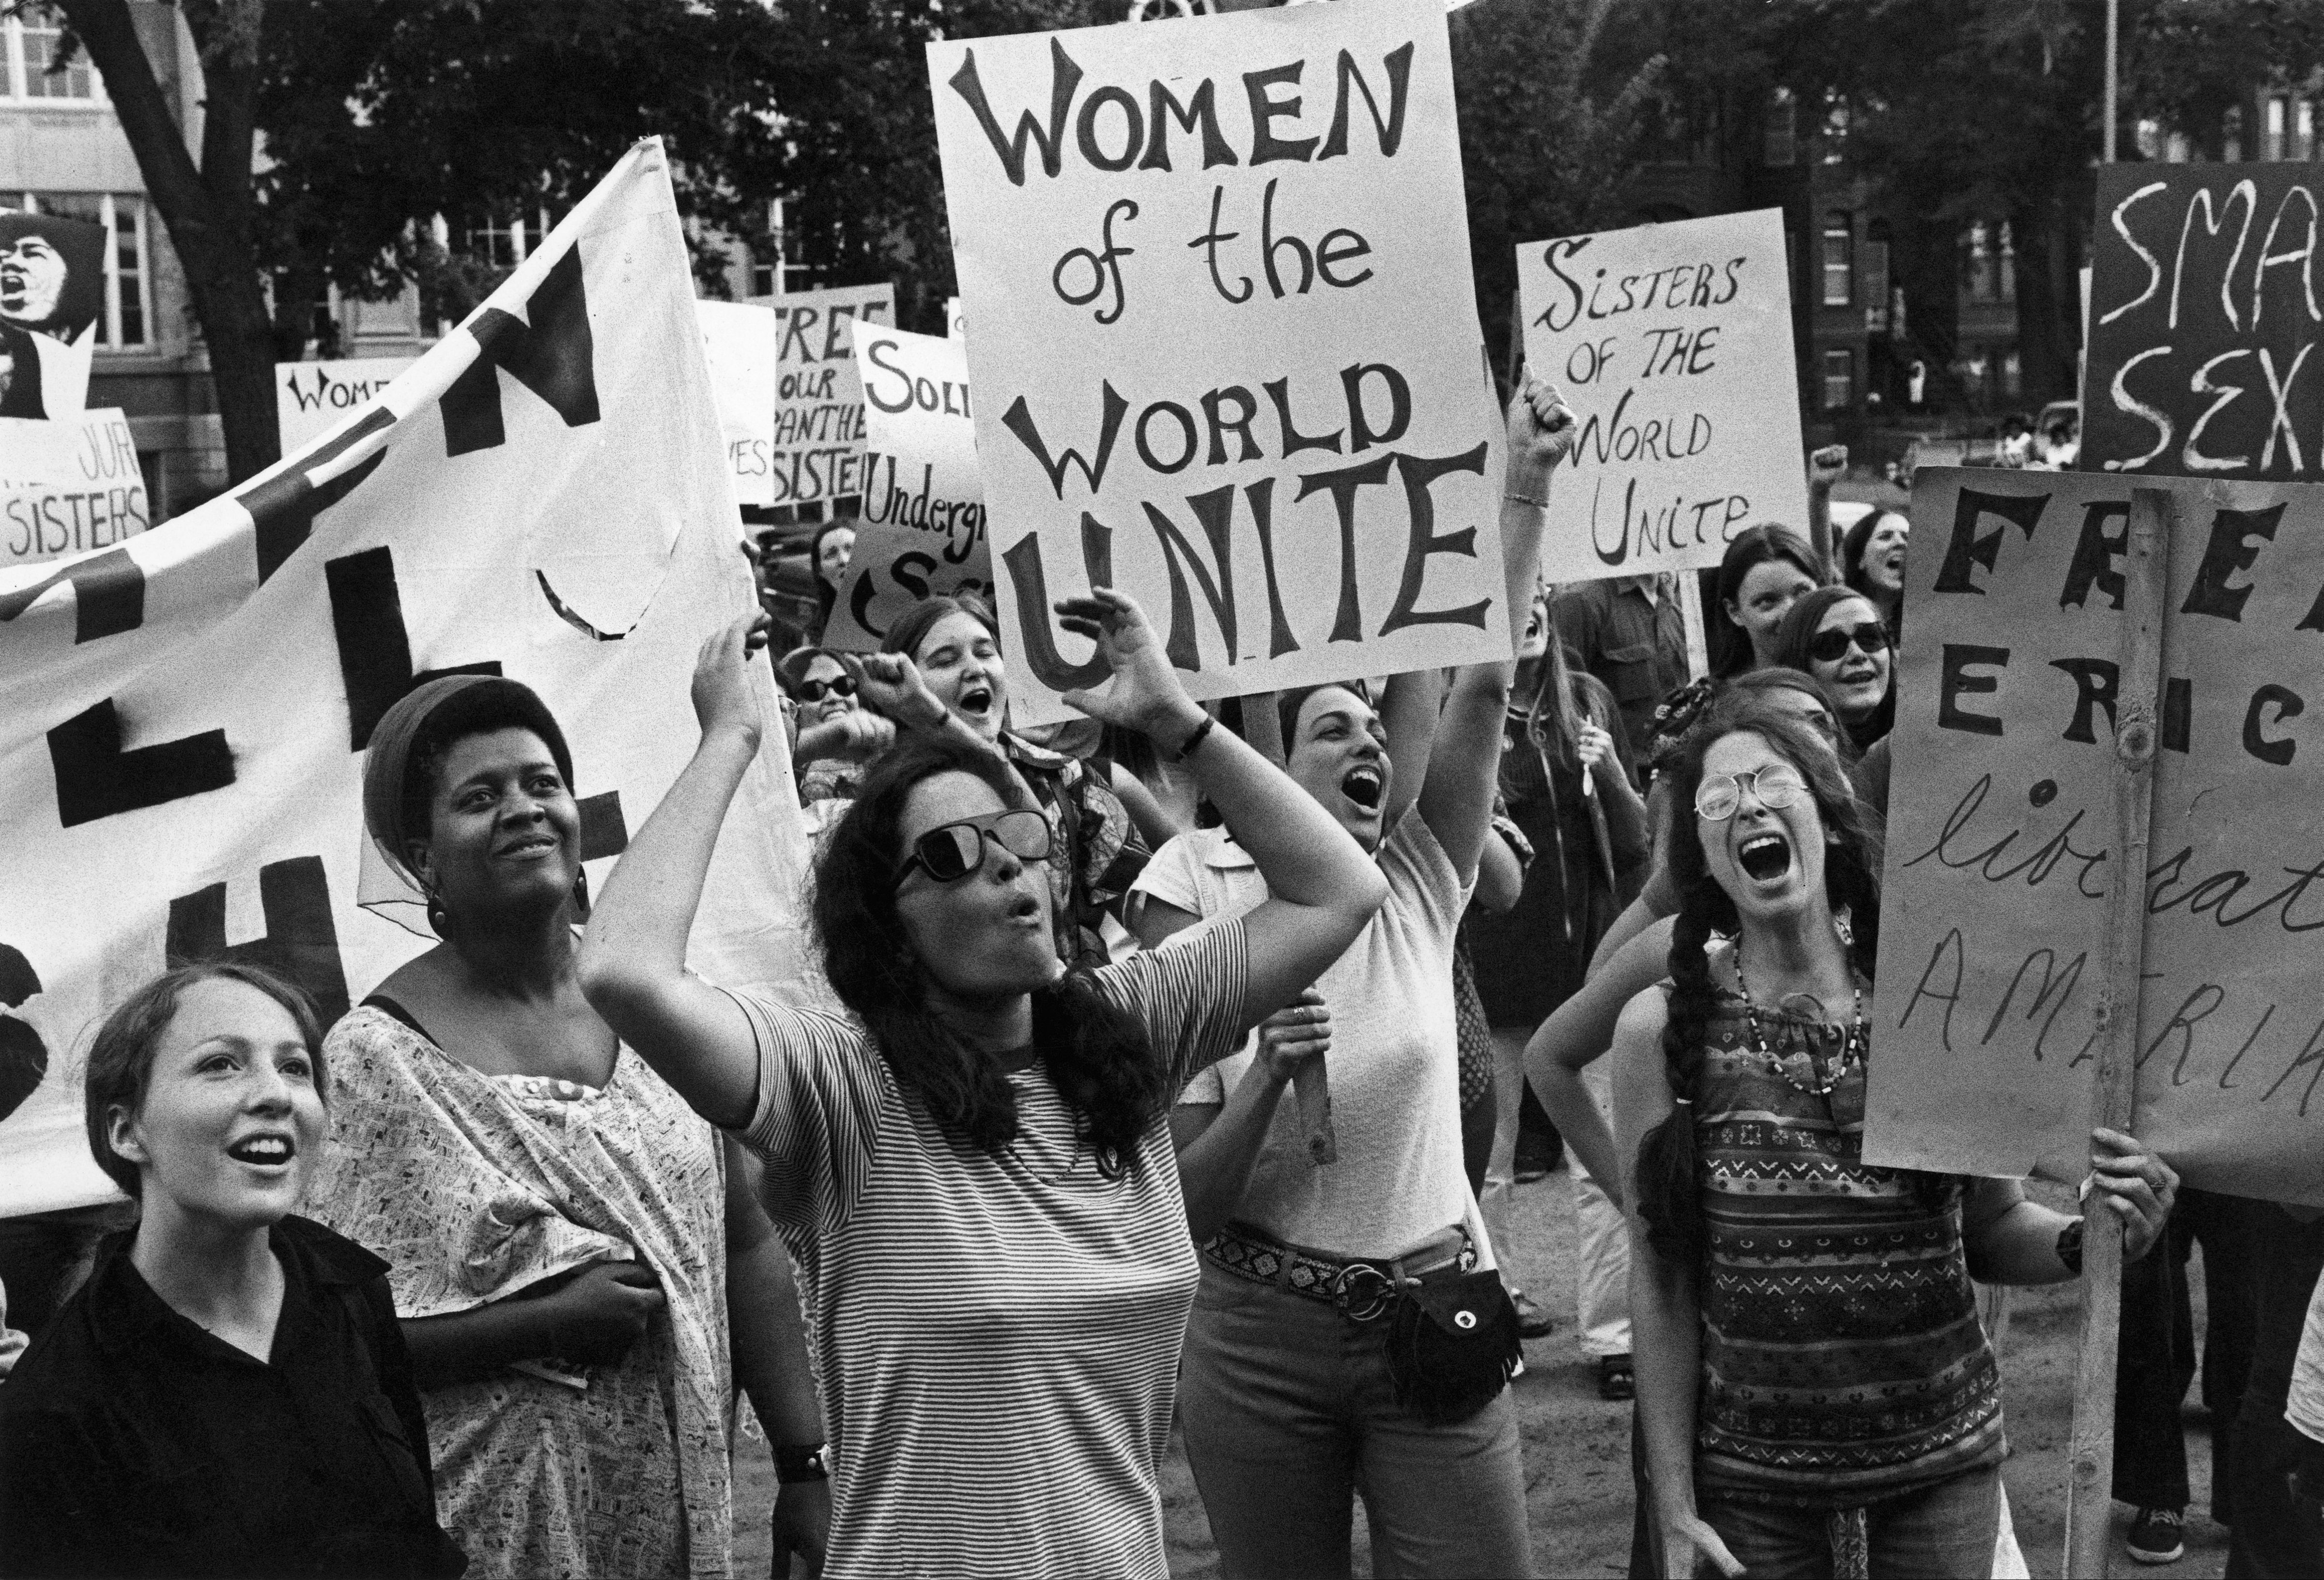 UNITED STATES - AUGUST 26:  Women's liberation movement in Washington, United States on August 26, 1970. (Don Carl STEFFEN—Gamma-Rapho via Getty Images)